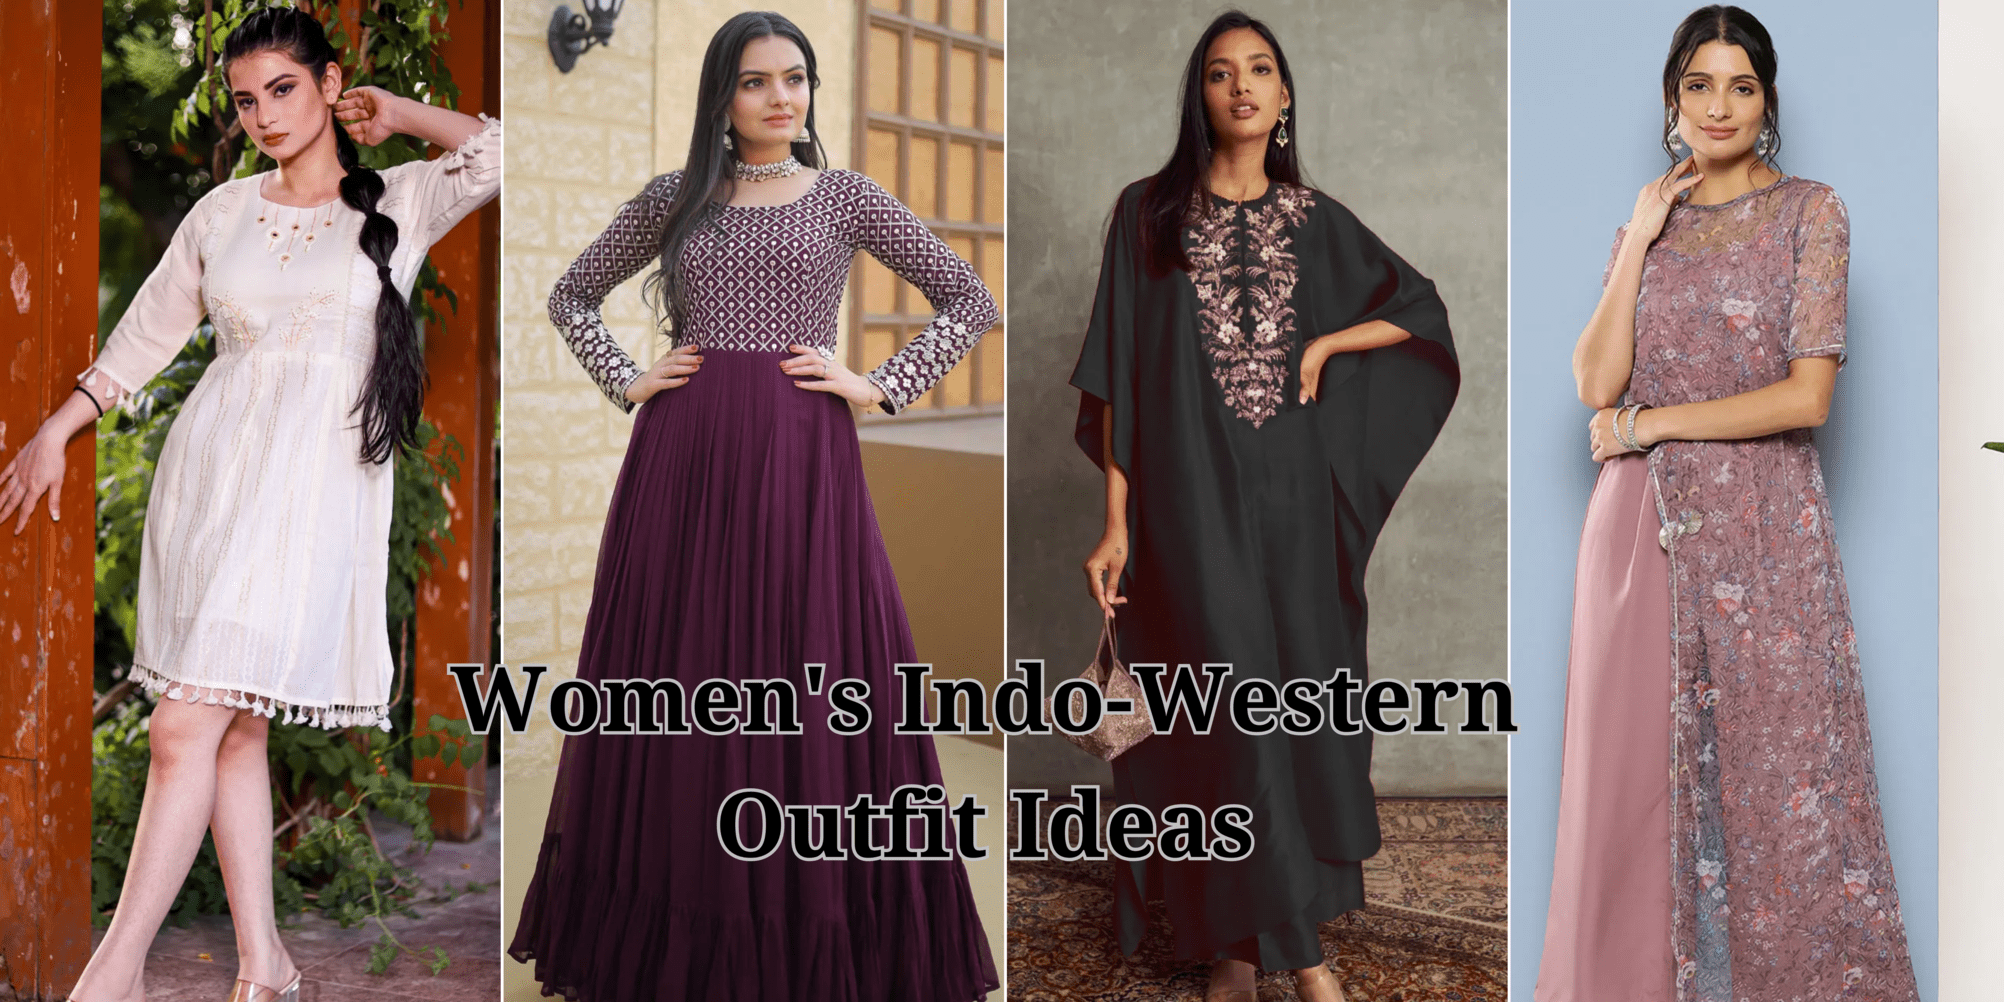 Redefining Women's Clothing: Best Indo-Western Outfit Ideas